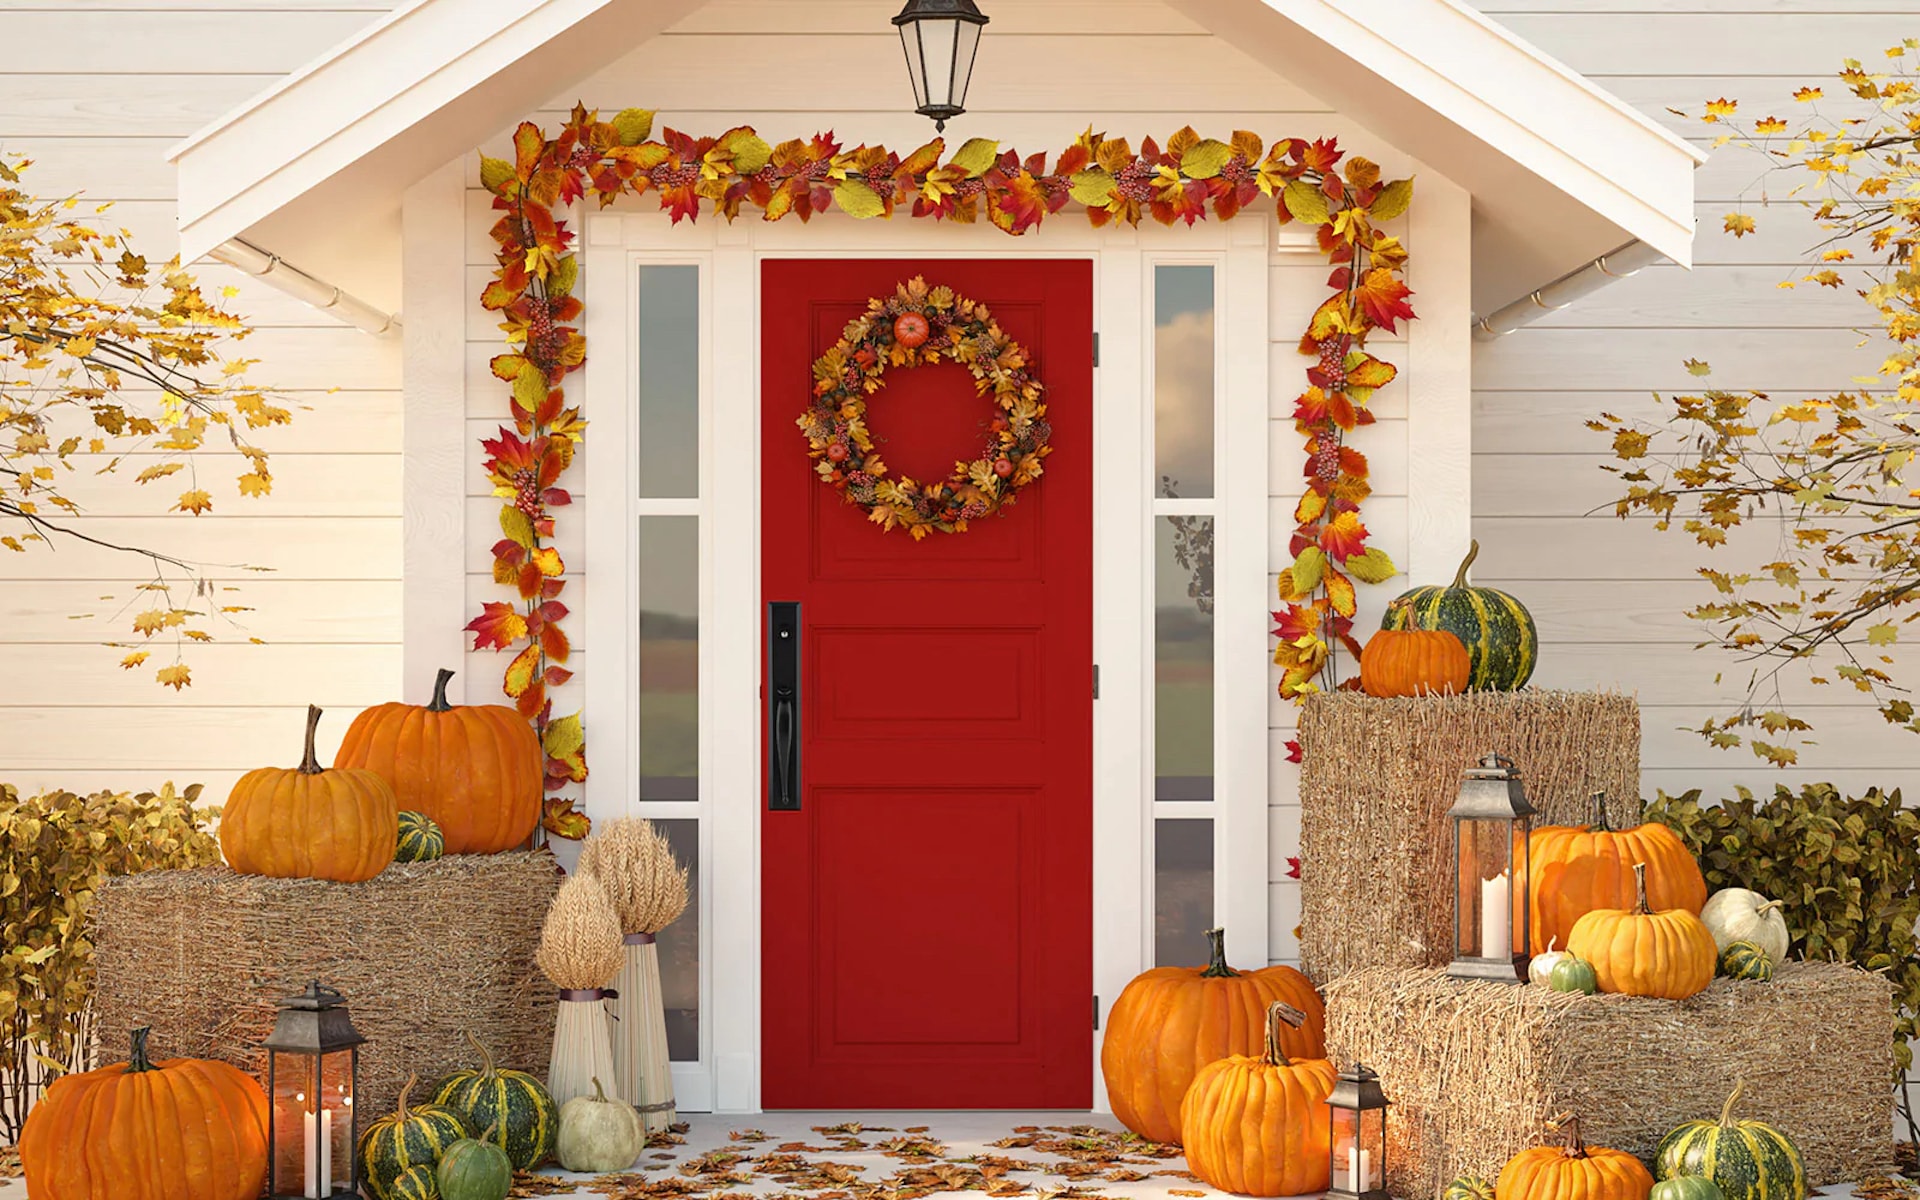 12 Stunning Fall Wreaths That Will Elevate Your Porch And Impress Your Neighbors